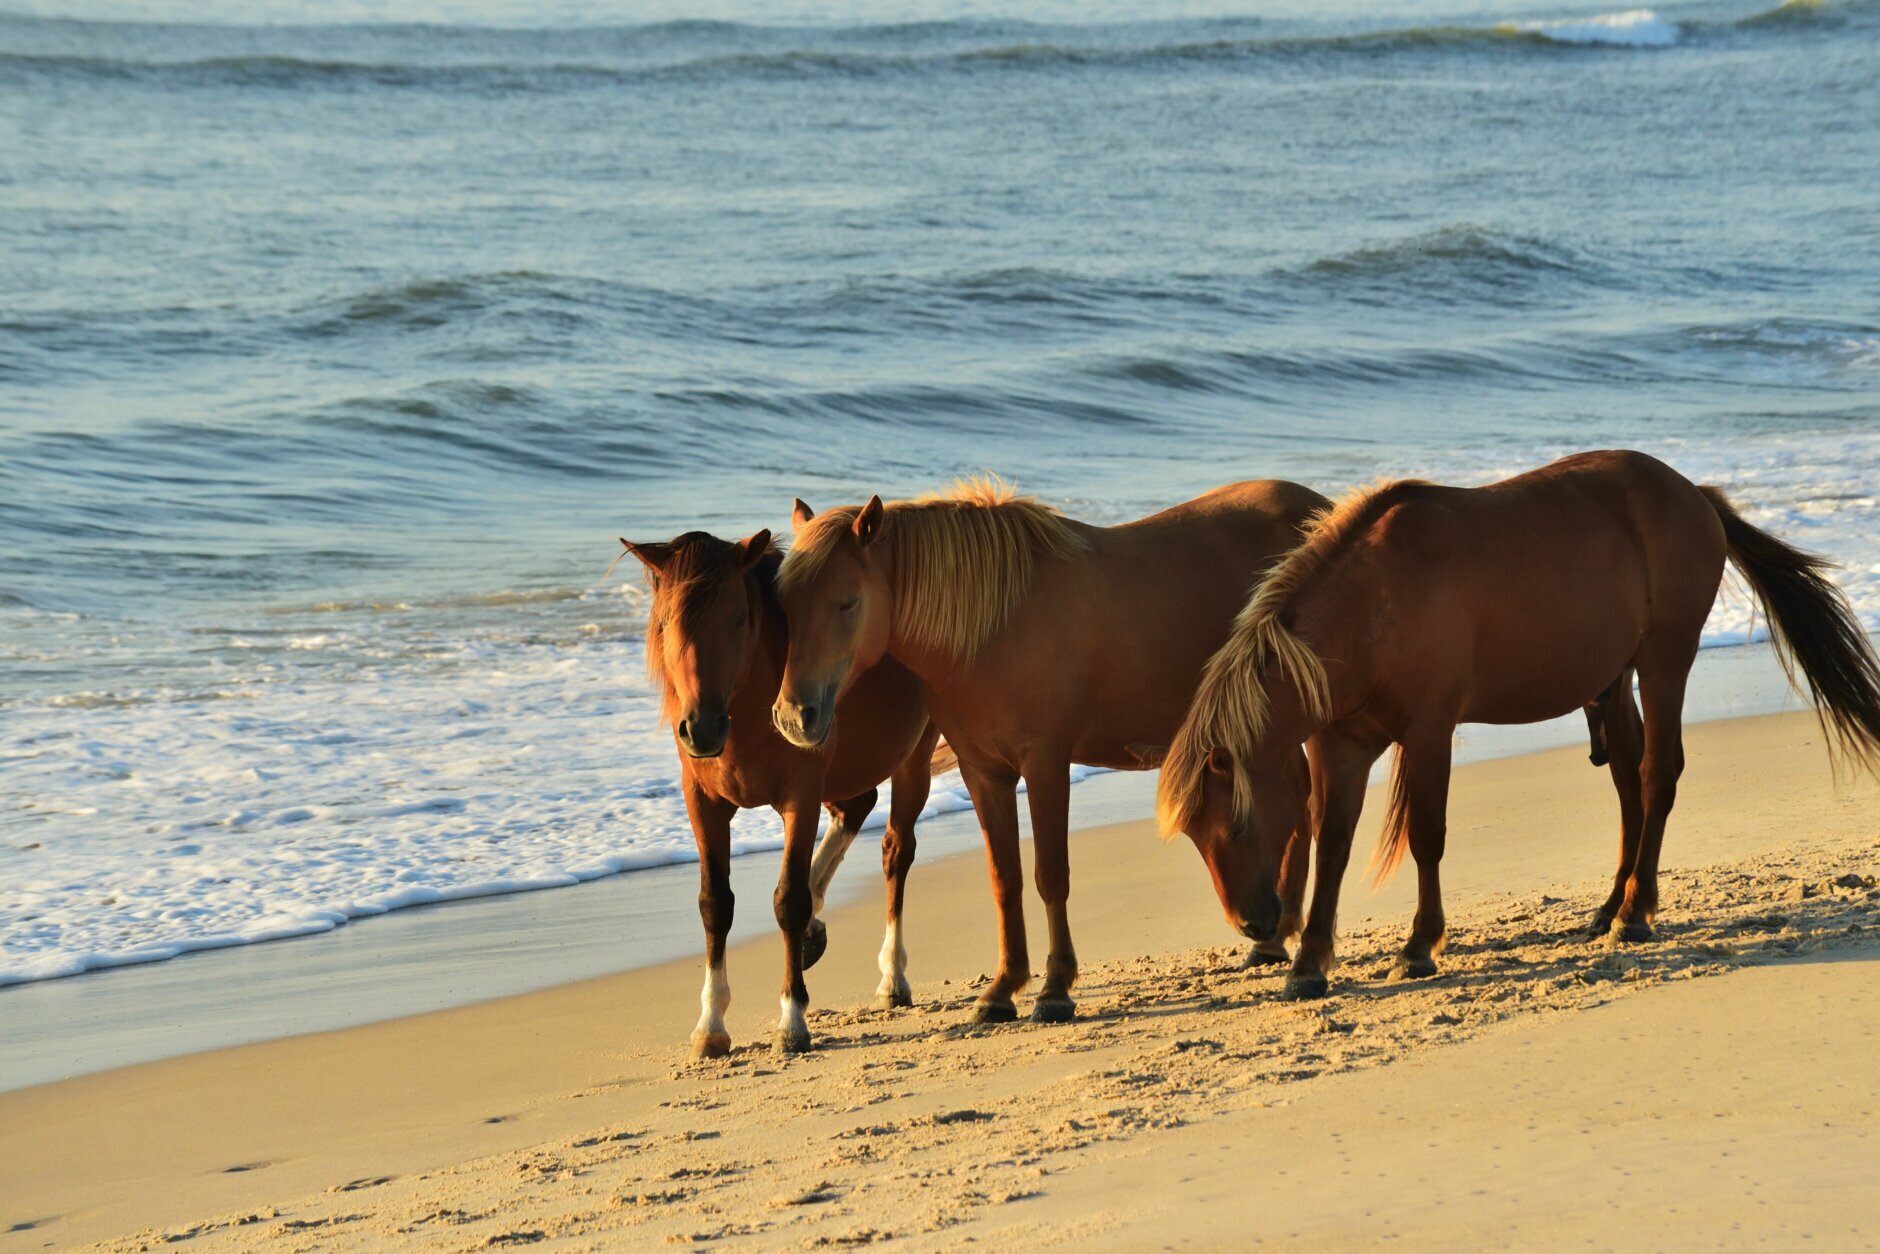 Three Assateague ponies, one stallion and two mares, walking along the surf at the Assateague Island National Seashore beach staring at the camera hoping for a handout